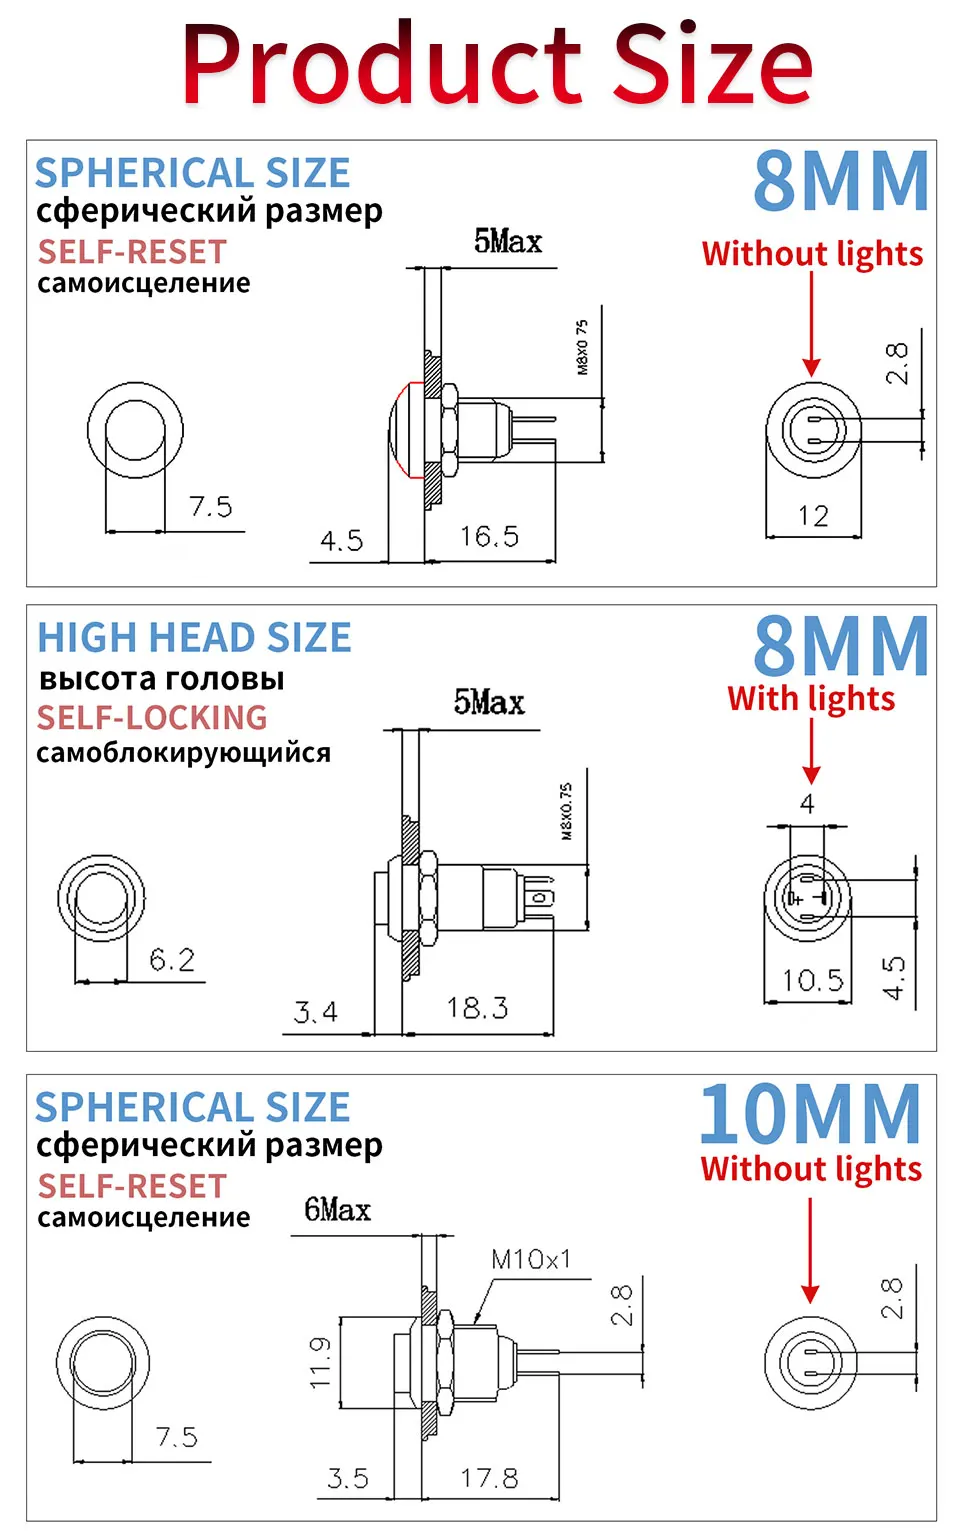 8 10 12 16 mm Waterproof Metal Push Button Switch LED Light Self-locking/Latching Self-reset 3 6 12 24 110 220V high head sony laptop charger